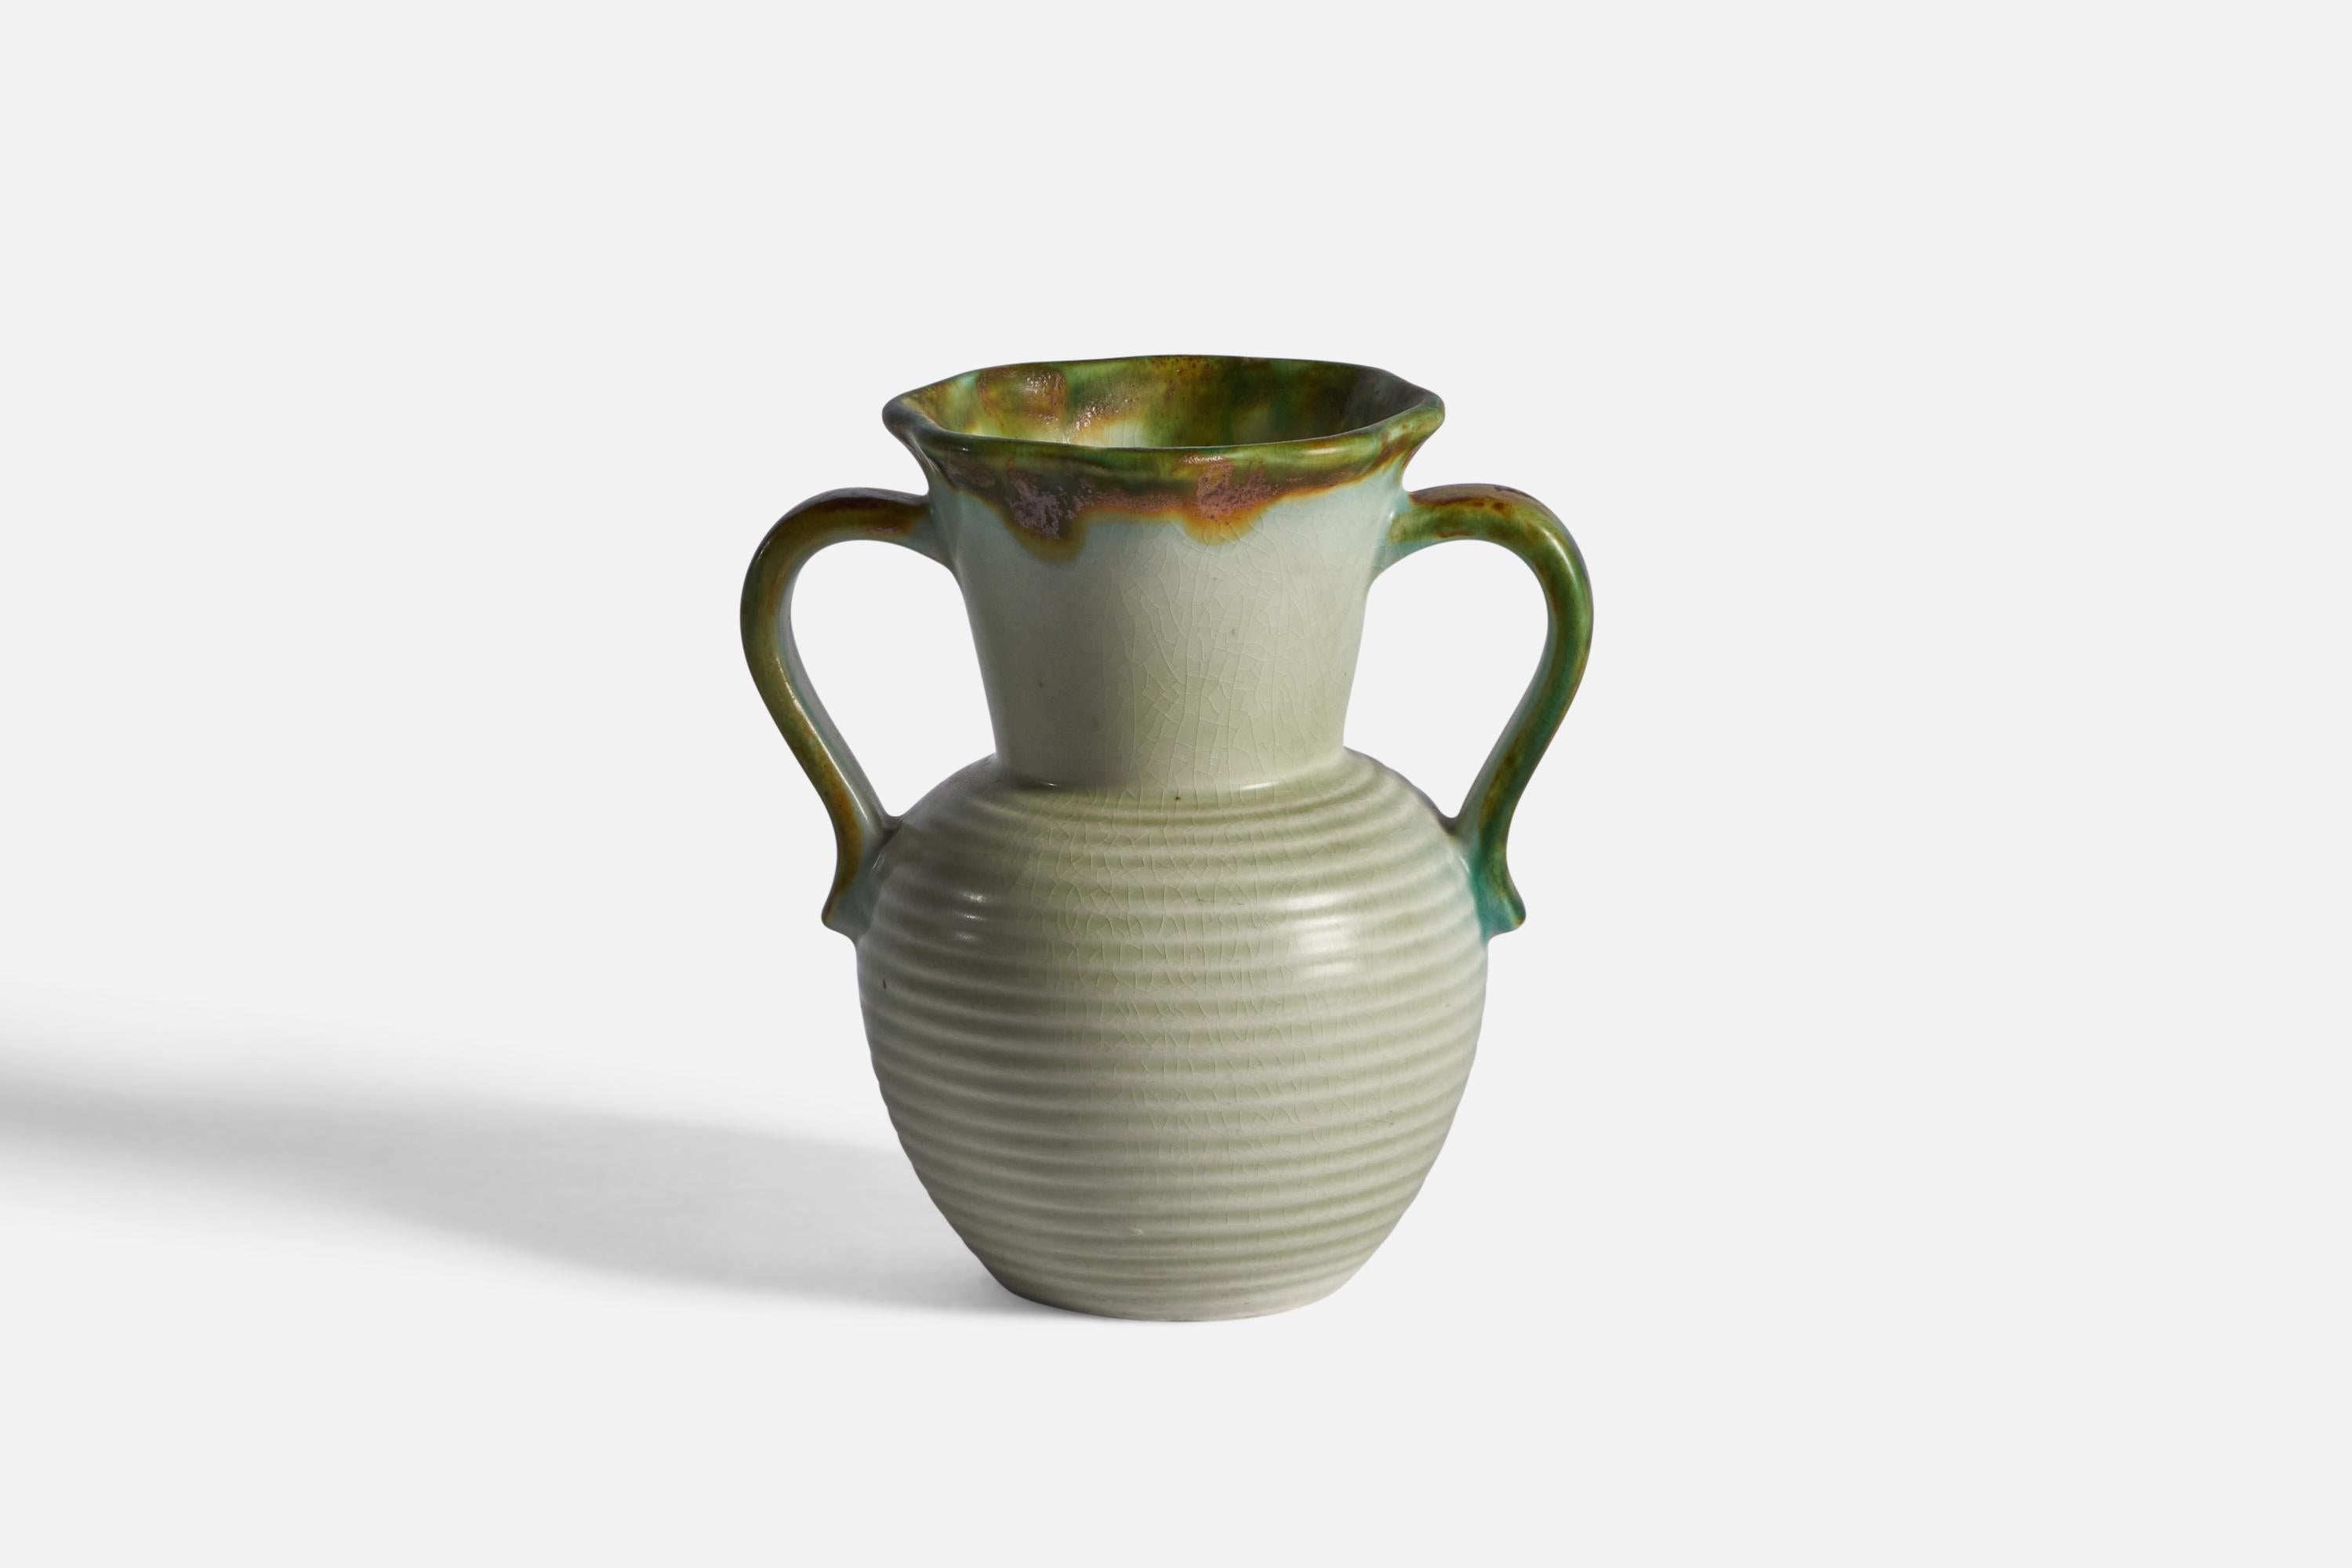 A green and grey-glazed stoneware vase, designed and produced by Rörstrand, c. 1930s.